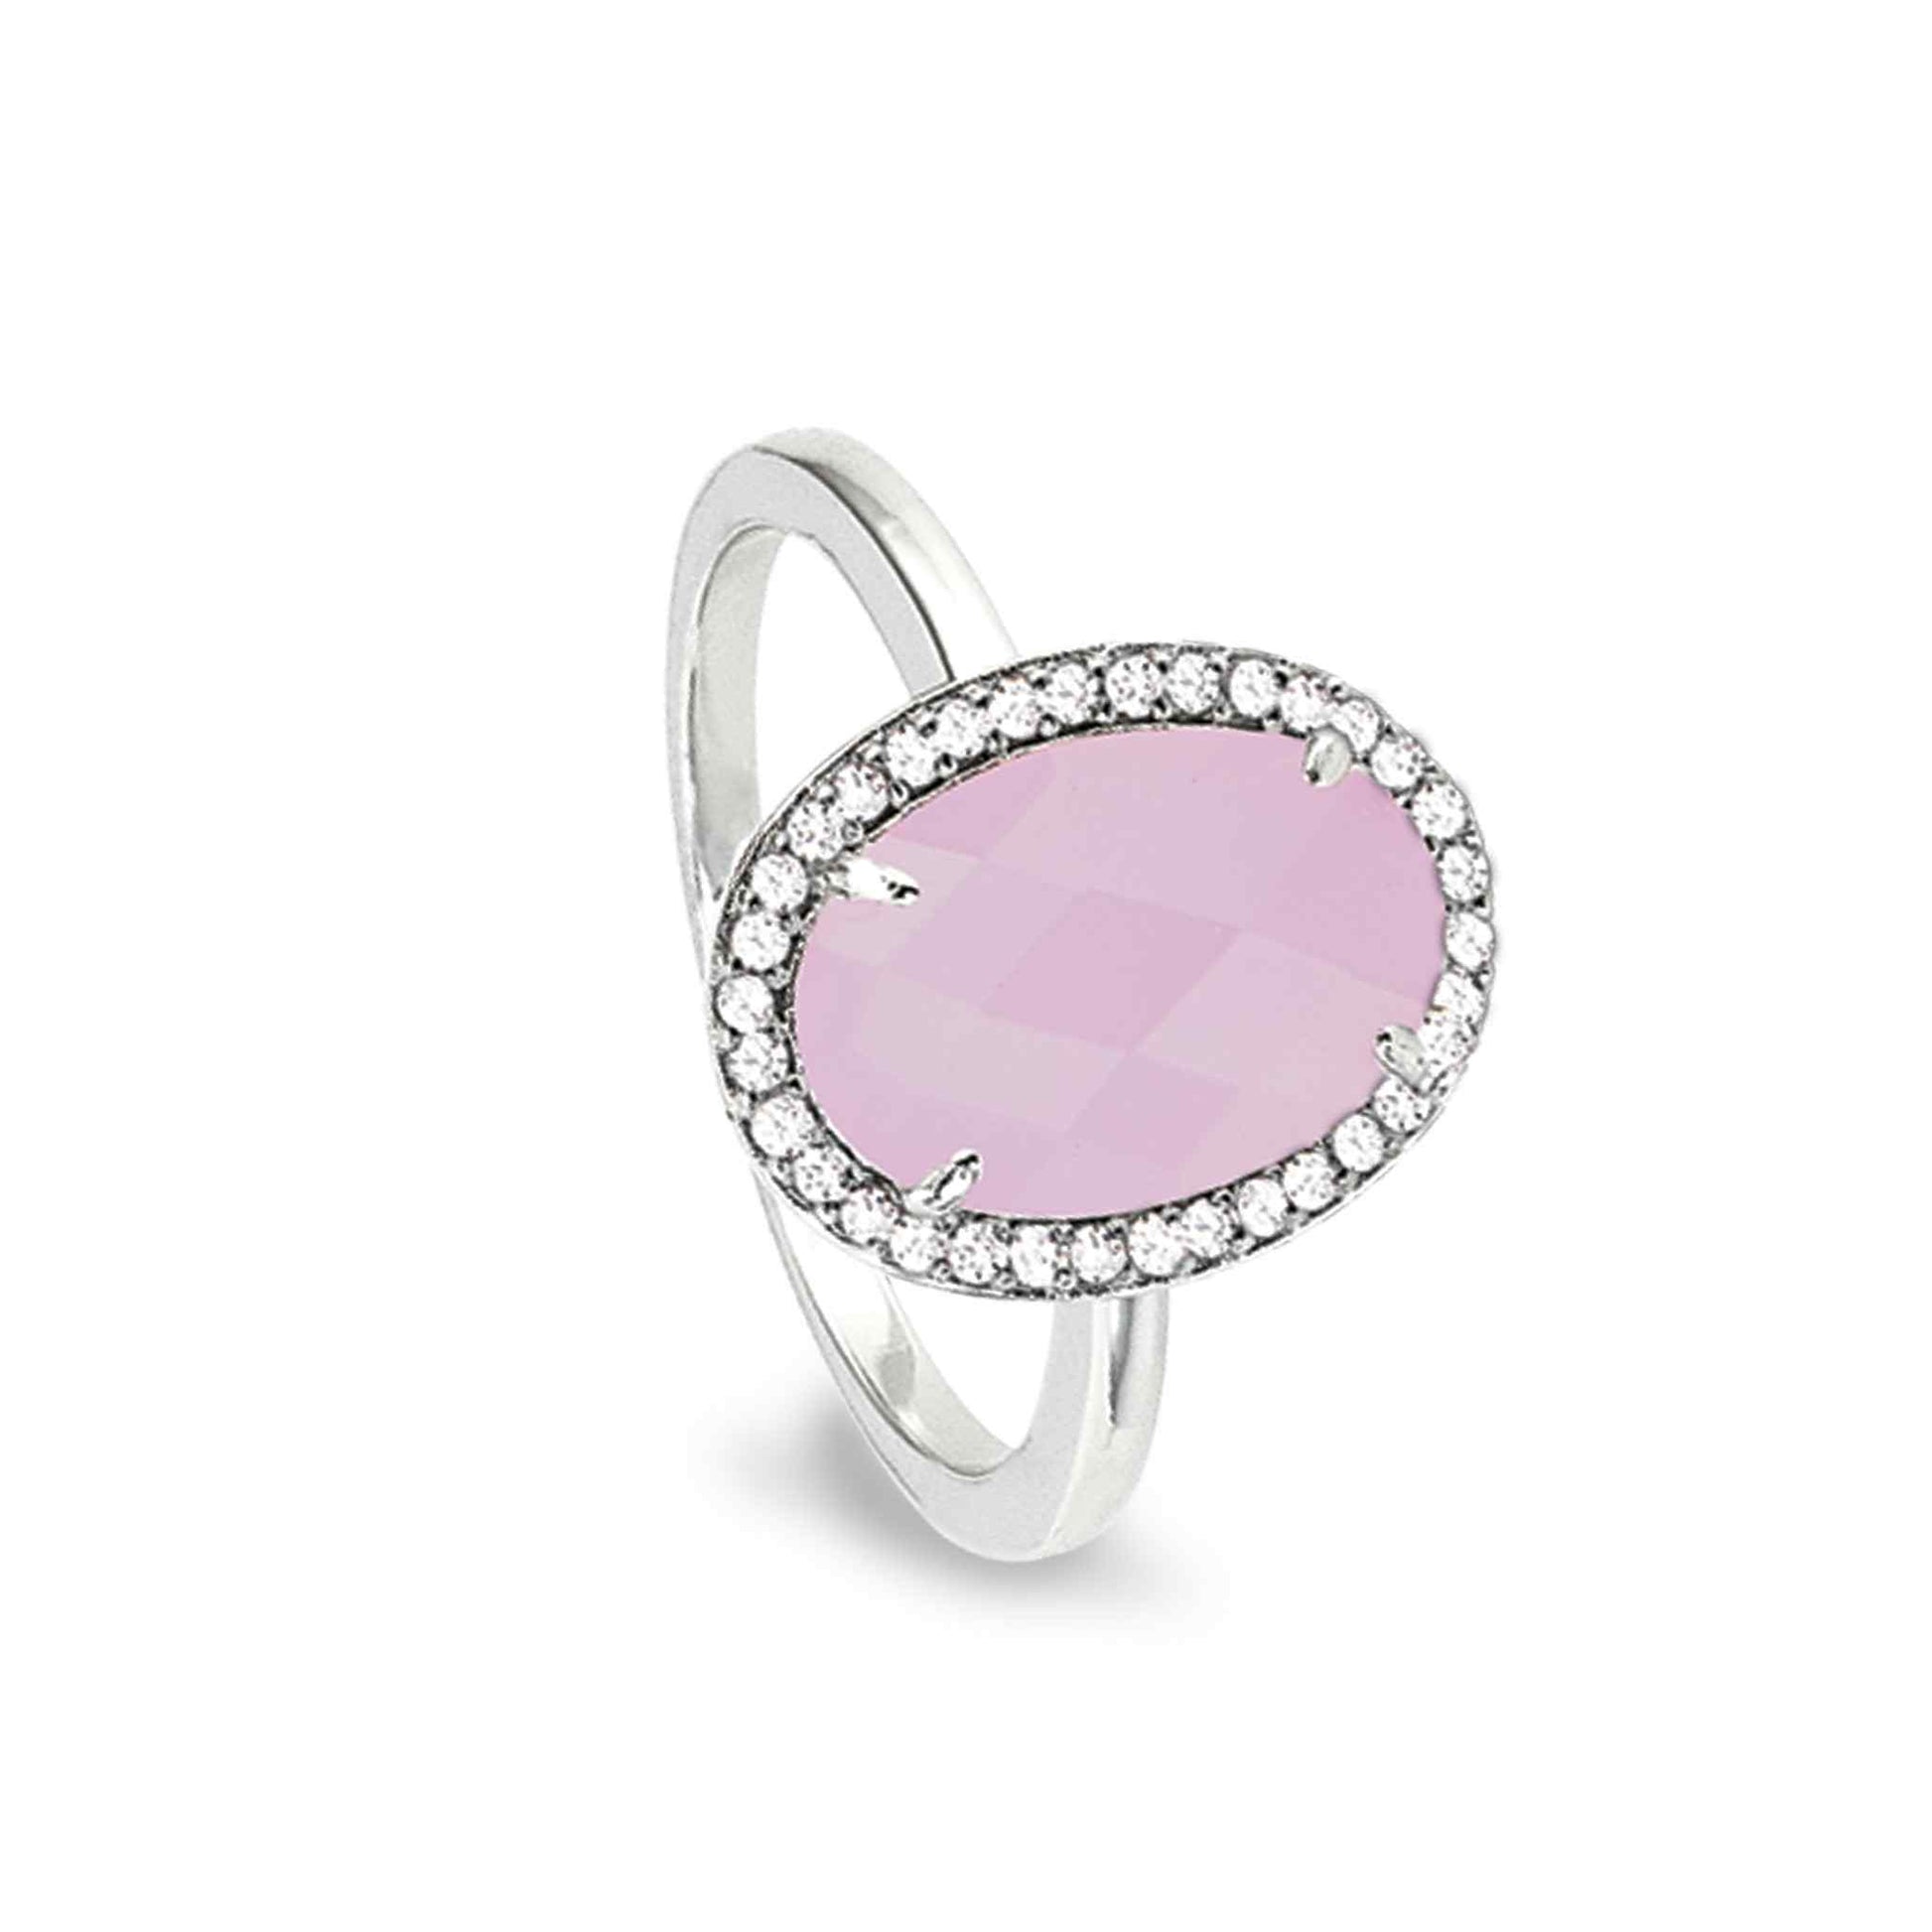 A facet cut rose quartz ring with simulated diamonds displayed on a neutral white background.